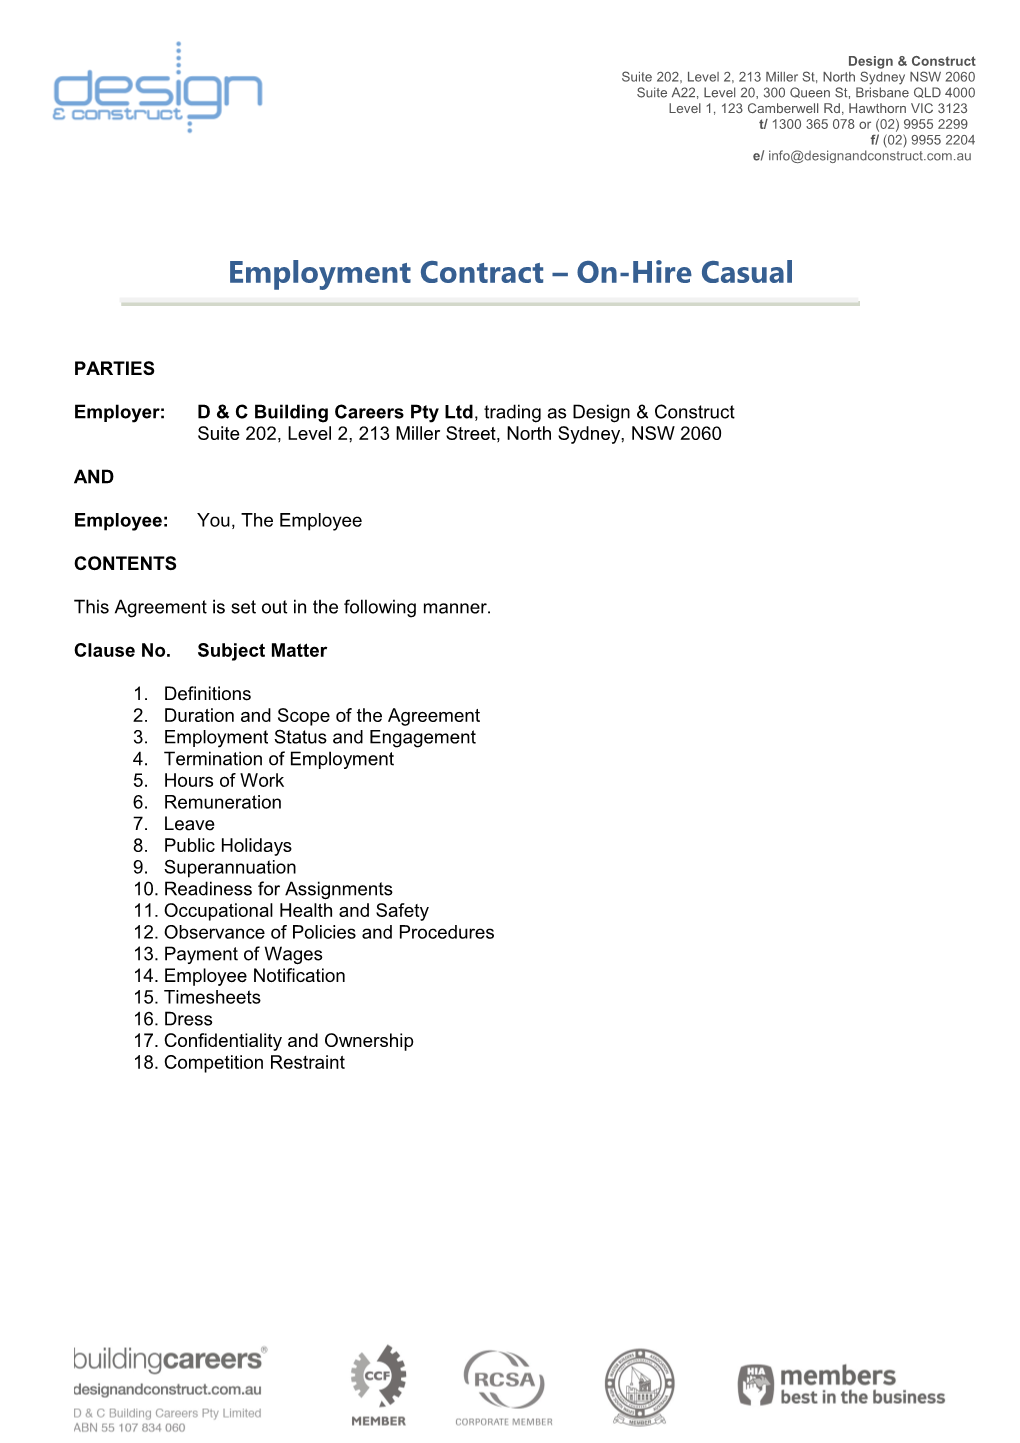 Employment Contract On-Hire Casual